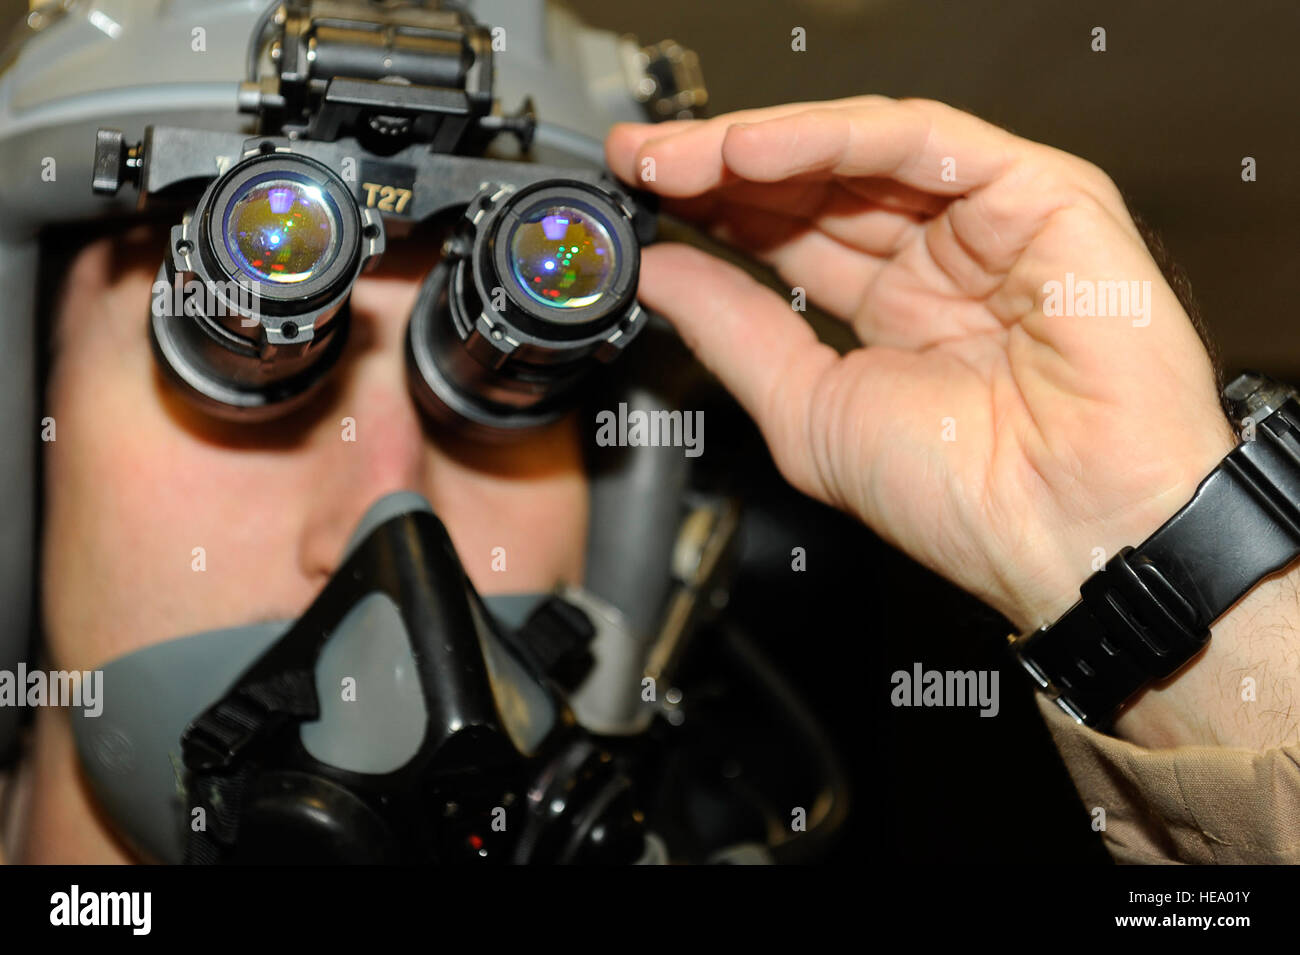 U.S. Air Force Capt. David Snodgrass, 79th Expeditionary Fighter Squadron, operational checks his night vision goggles before his flight Jan. 4, 2010. Snodgrass is from Ft. Worth, Texas and is stationed at Shaw Air Force Base, S.C. Stock Photo